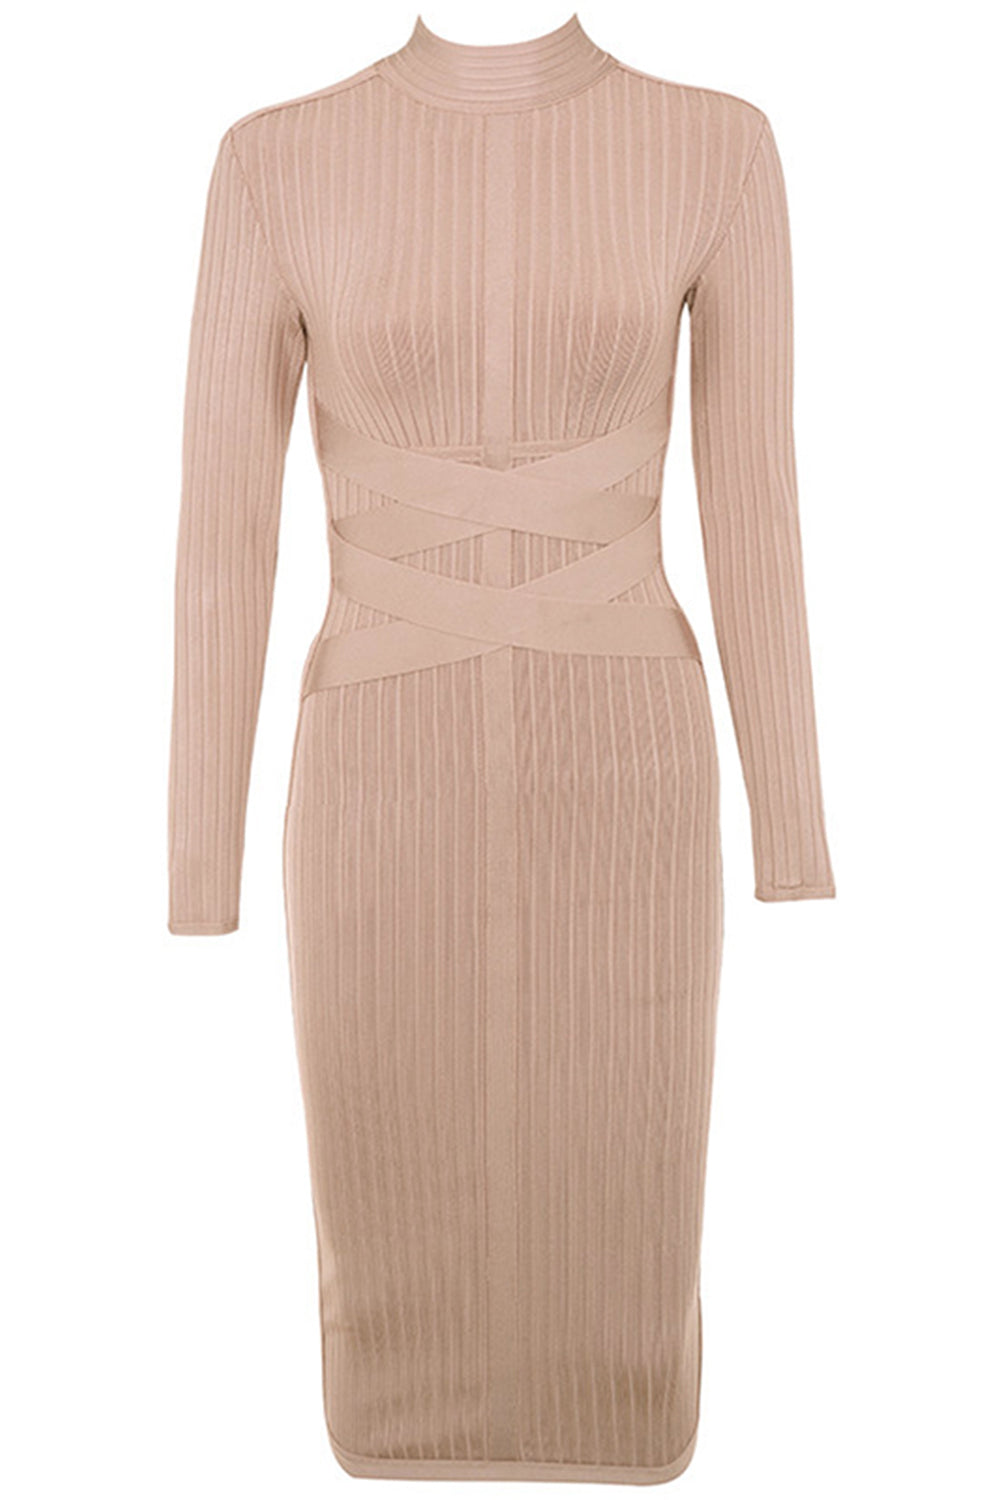 nude bandage dress, nude bodycon dress, cocktail dress, bandage dress for women, feather bandage dress, knee length bandage dress, long sleeve bandage dress, event dress, party dress, high neck bandage dress, stripe bandage dress